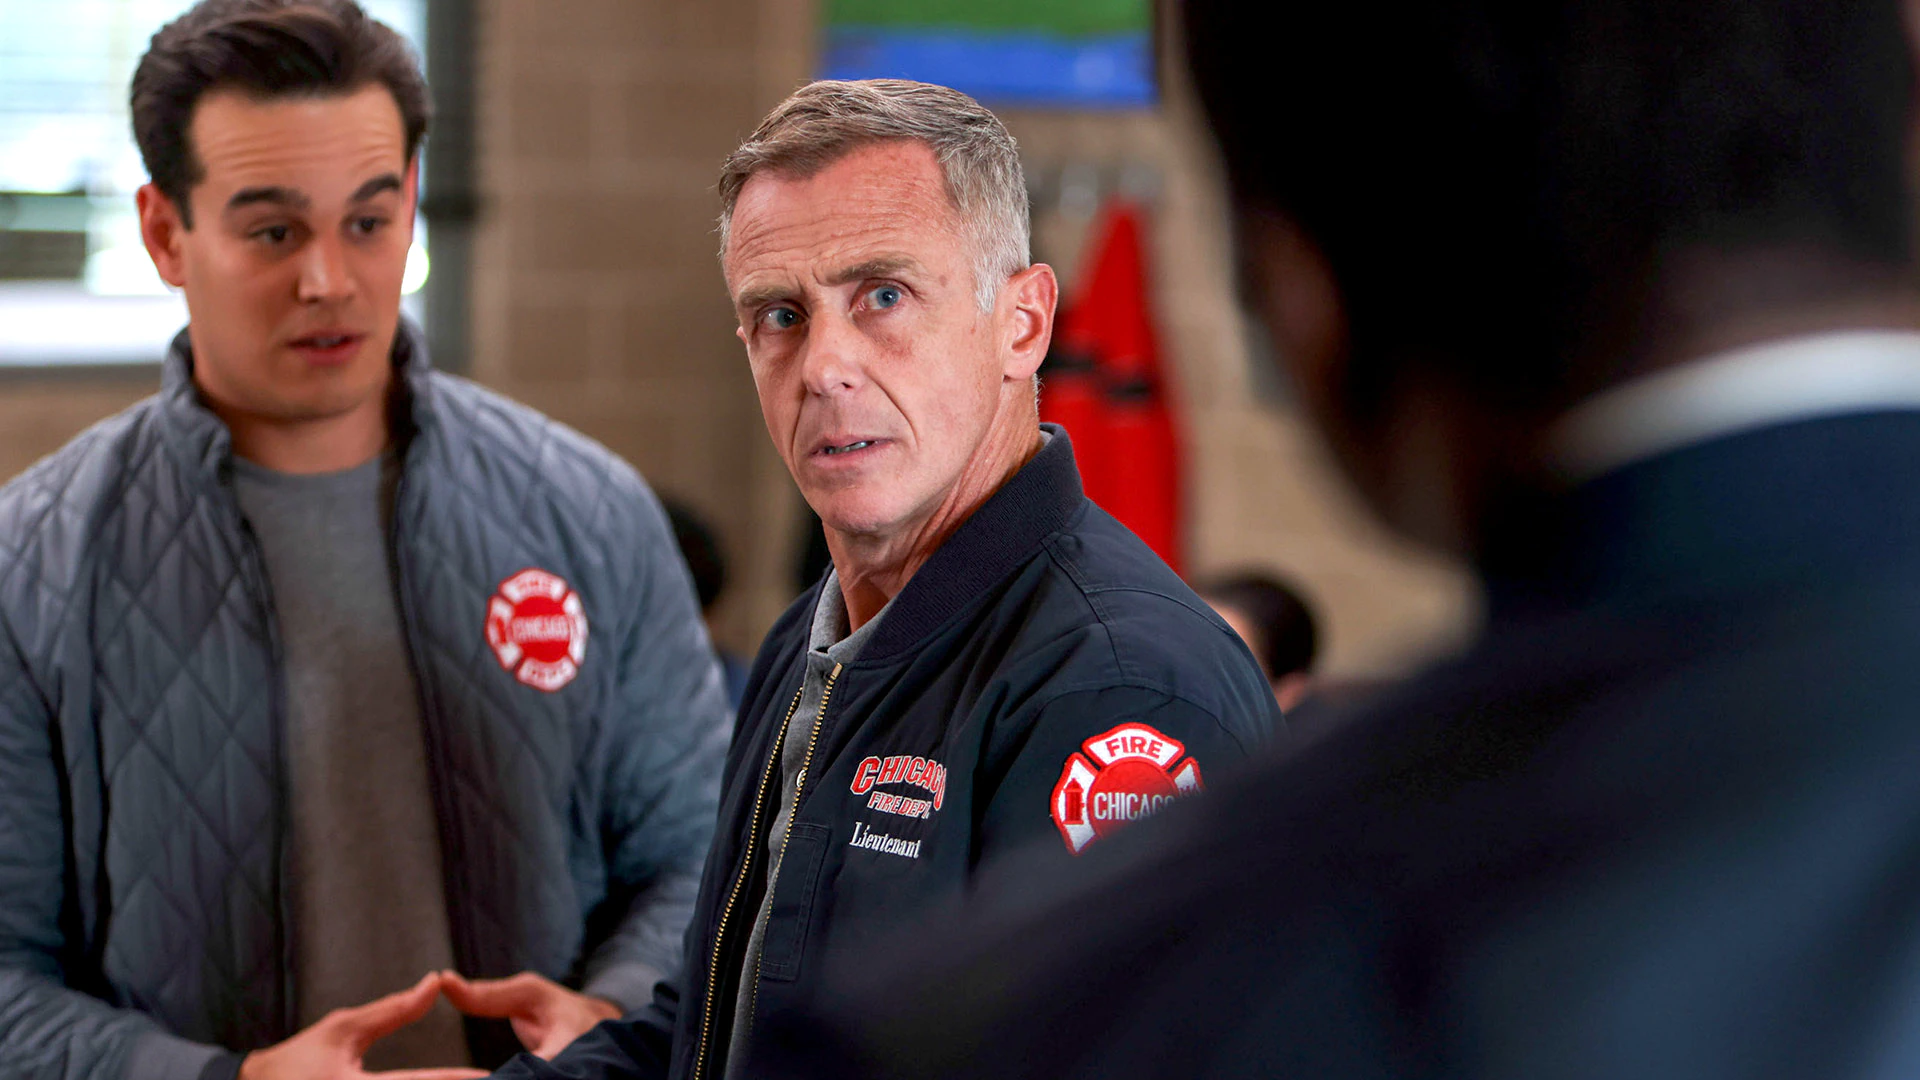 Chicago Fire Season 11 Episode 10 Release Date, Preview and How to Watch